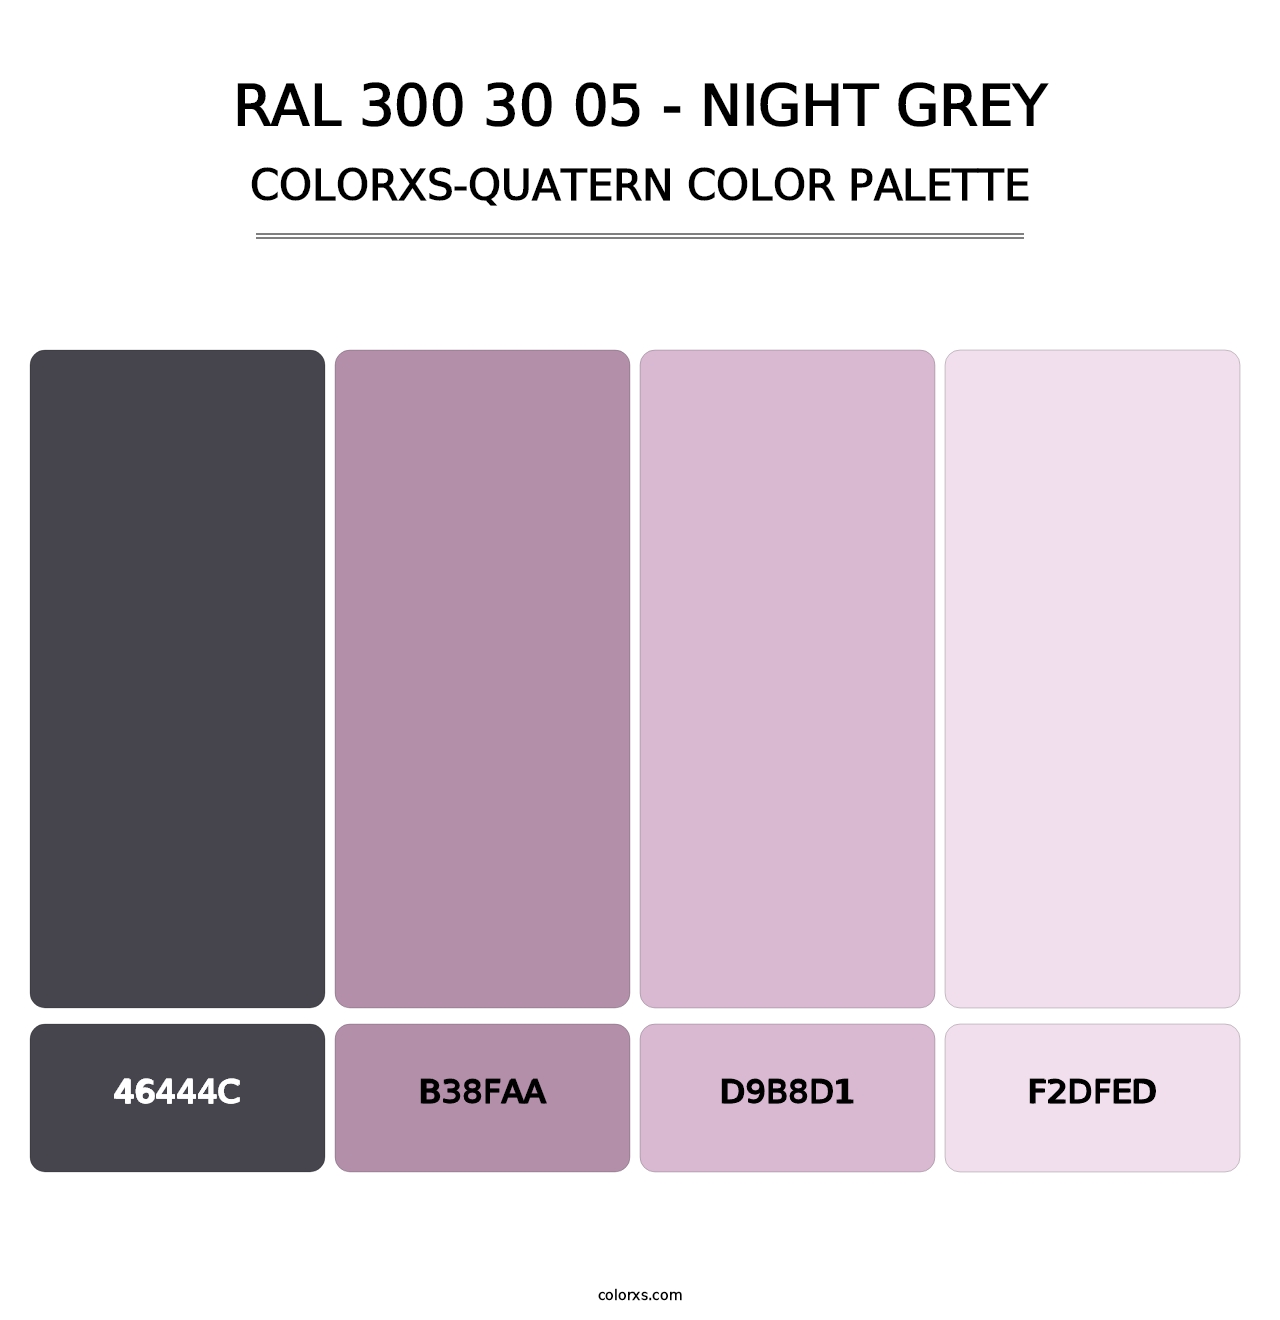 RAL 300 30 05 - Night Grey - Colorxs Quatern Palette